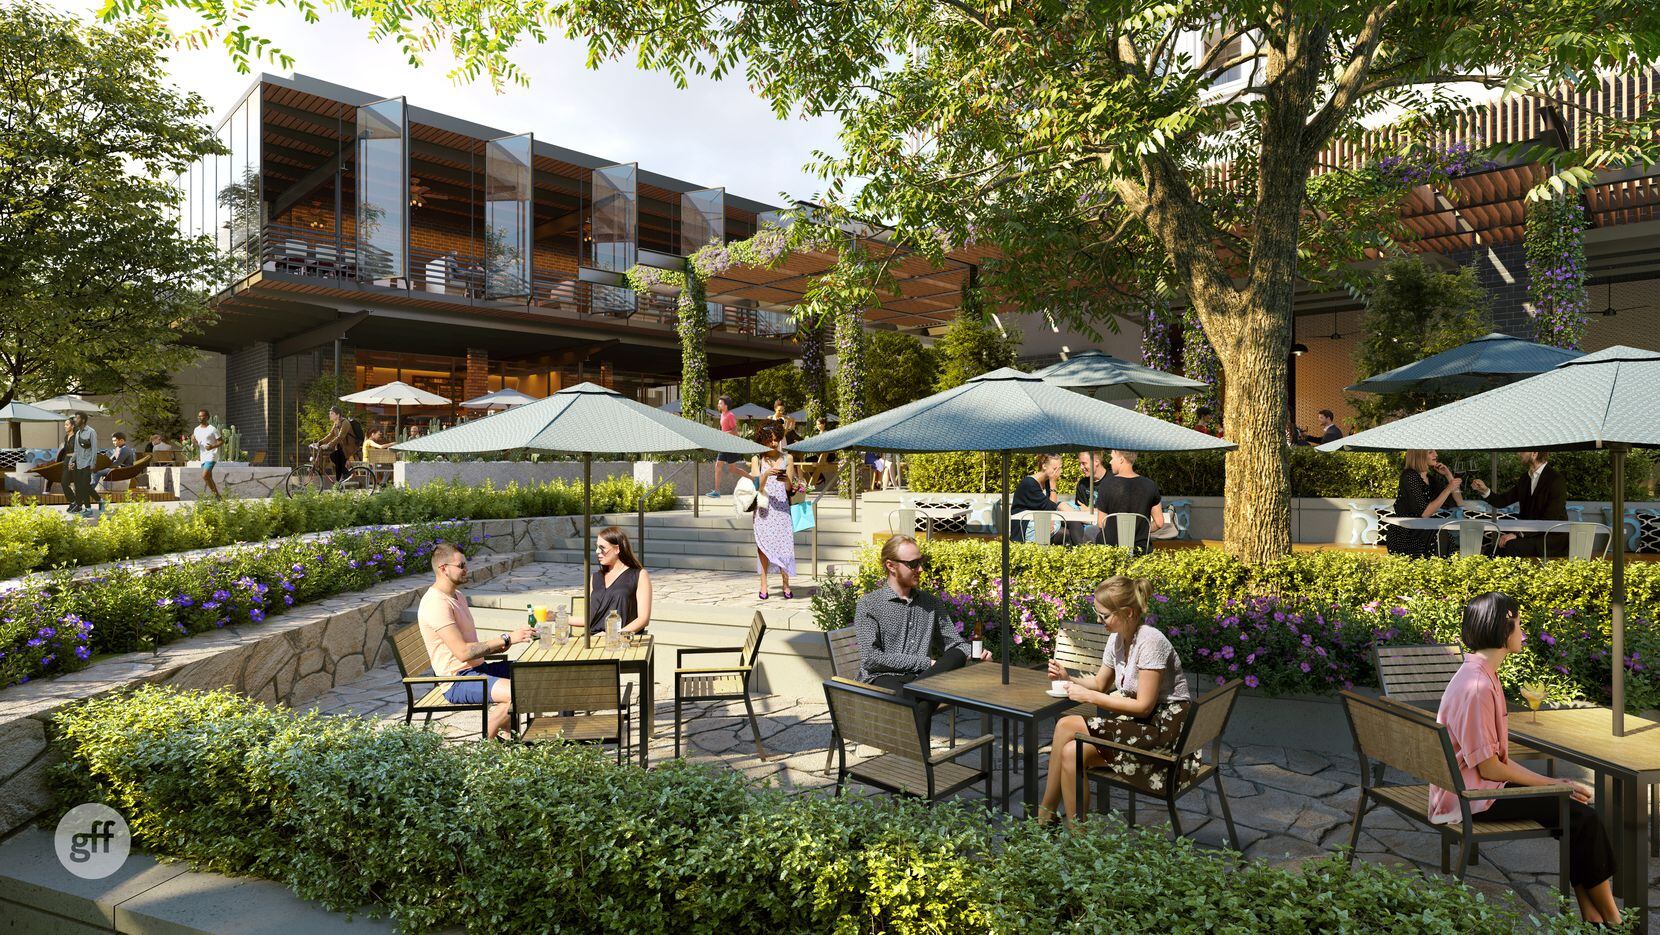 One or two restaurants are planned near Katy Trail in Carlisle-on-the-Creek.